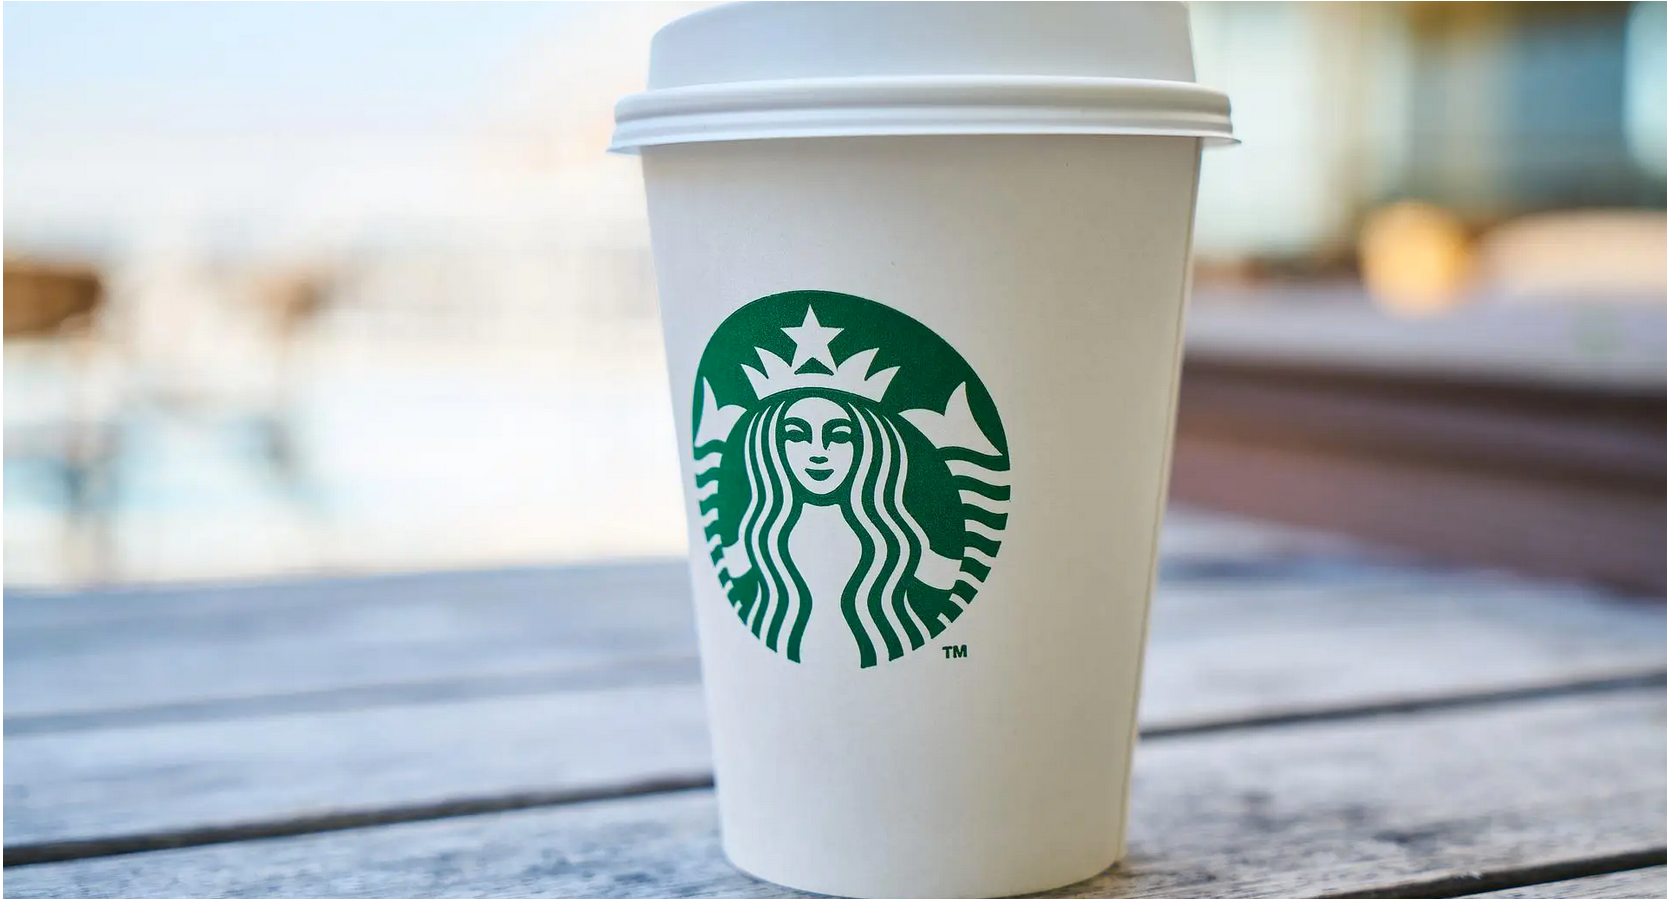 Starbucks Stock Shows Relative Strength To S&P 500: Here's What To Watch